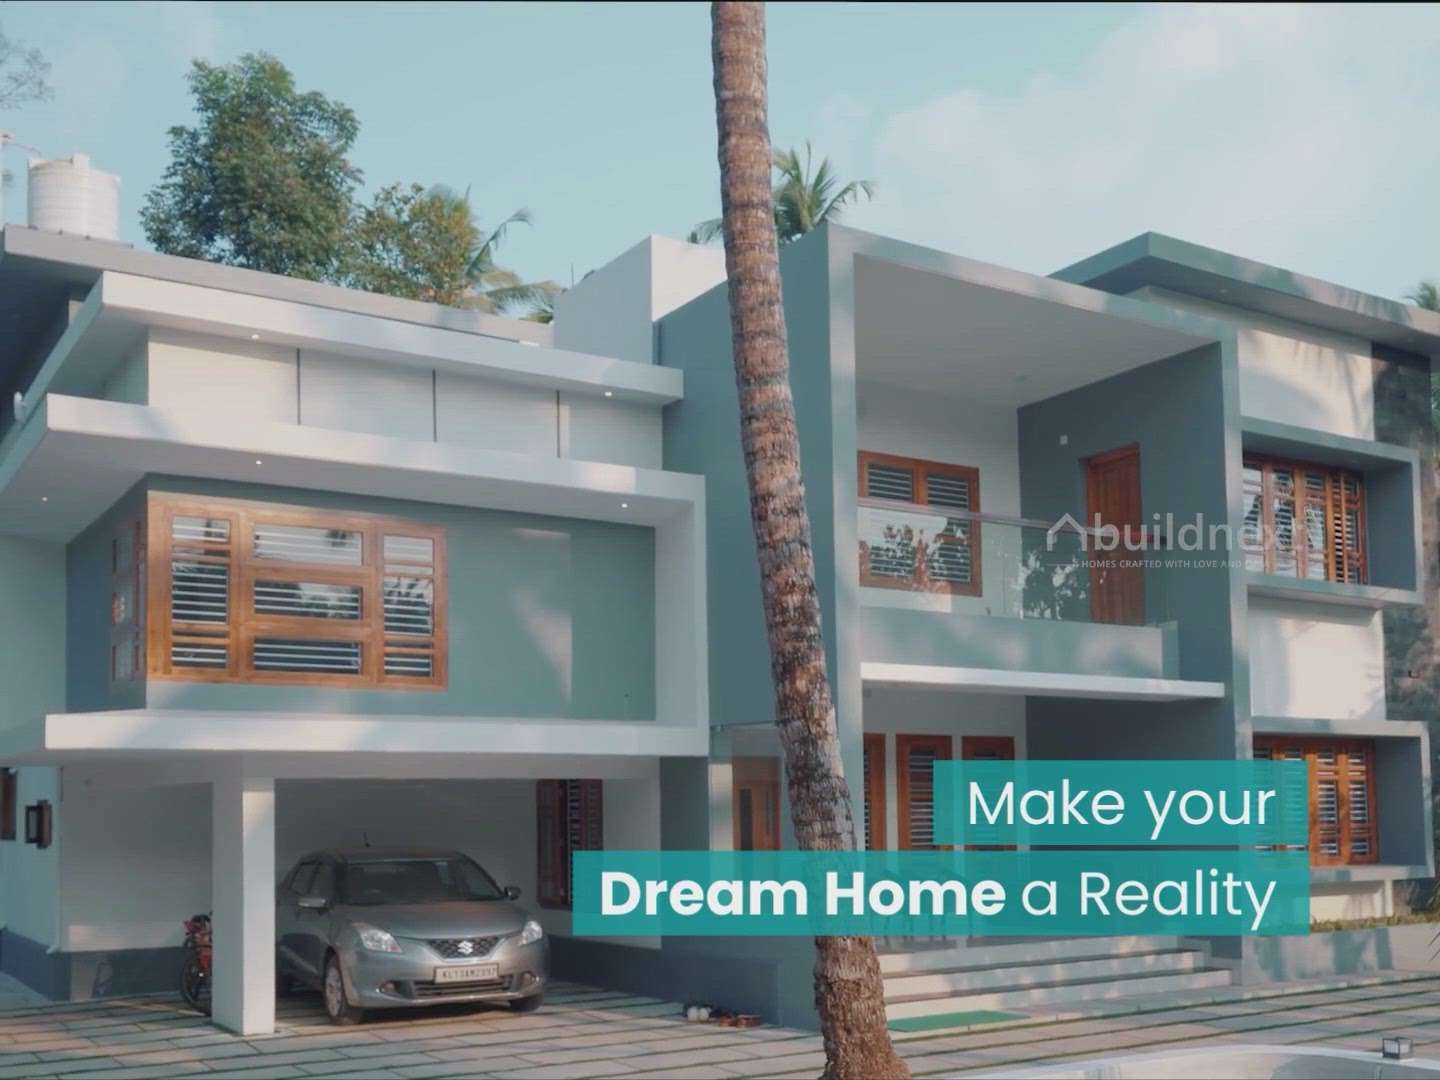 A Contemporary Home in #Kannur, Kerala : Design Inspiration for Your Home #HouseDesigns #decorshopping